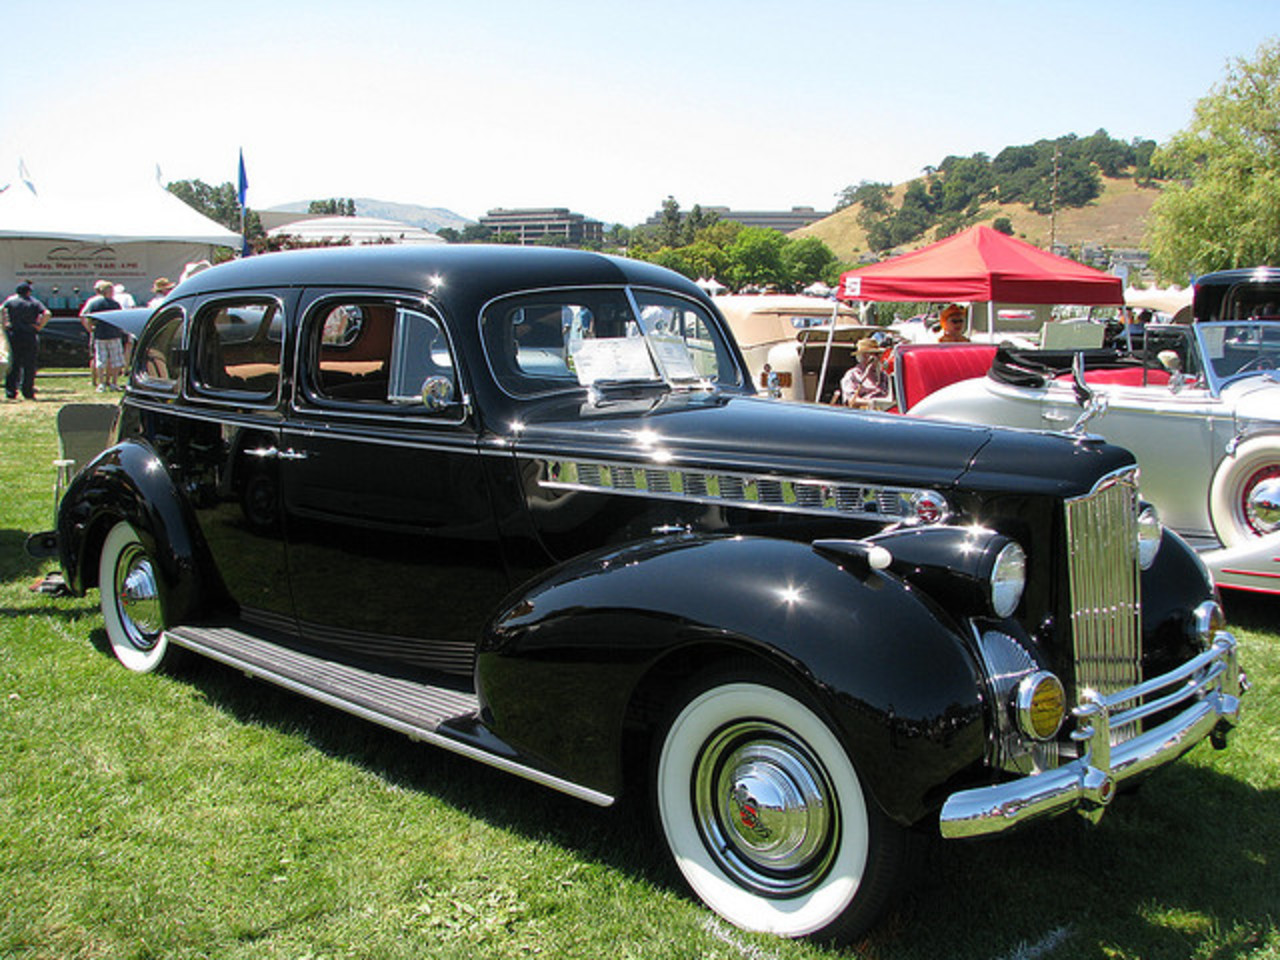 Packard 1803 Touring Sedan Photo Gallery: Photo #12 out of 9 ...